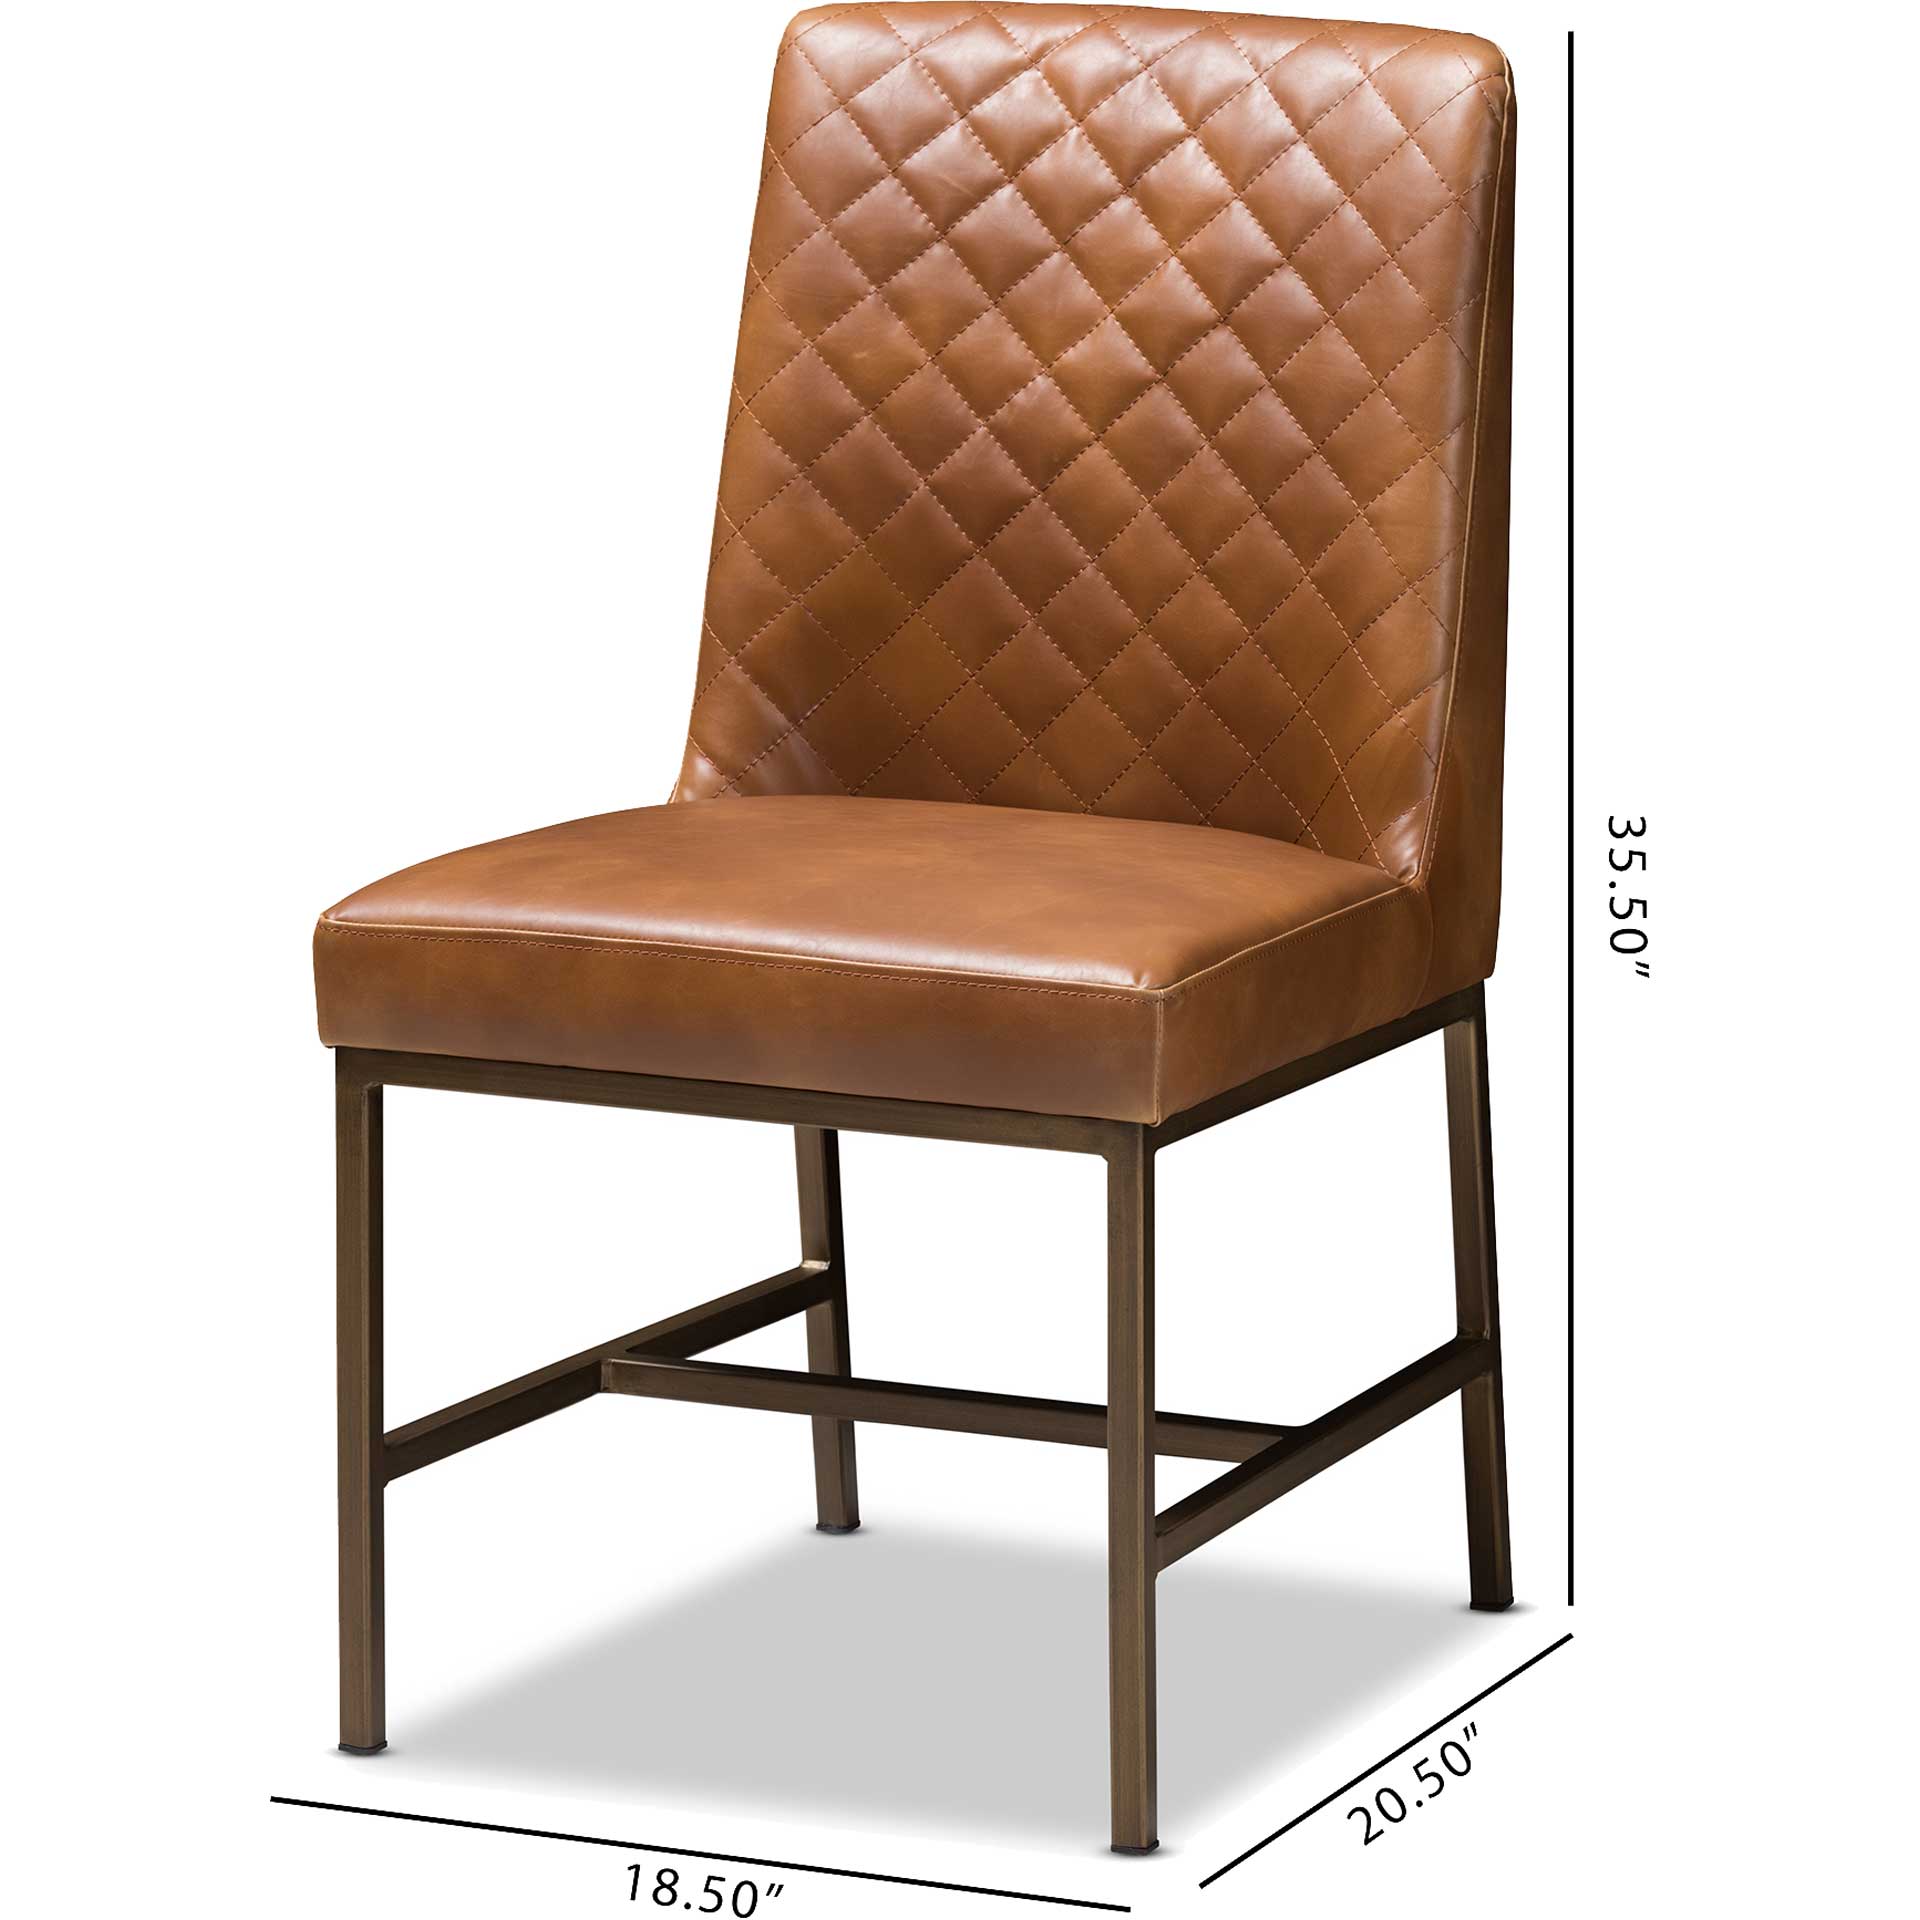 Mabelle Faux Leather Dining Chair Brown (Set of 2)